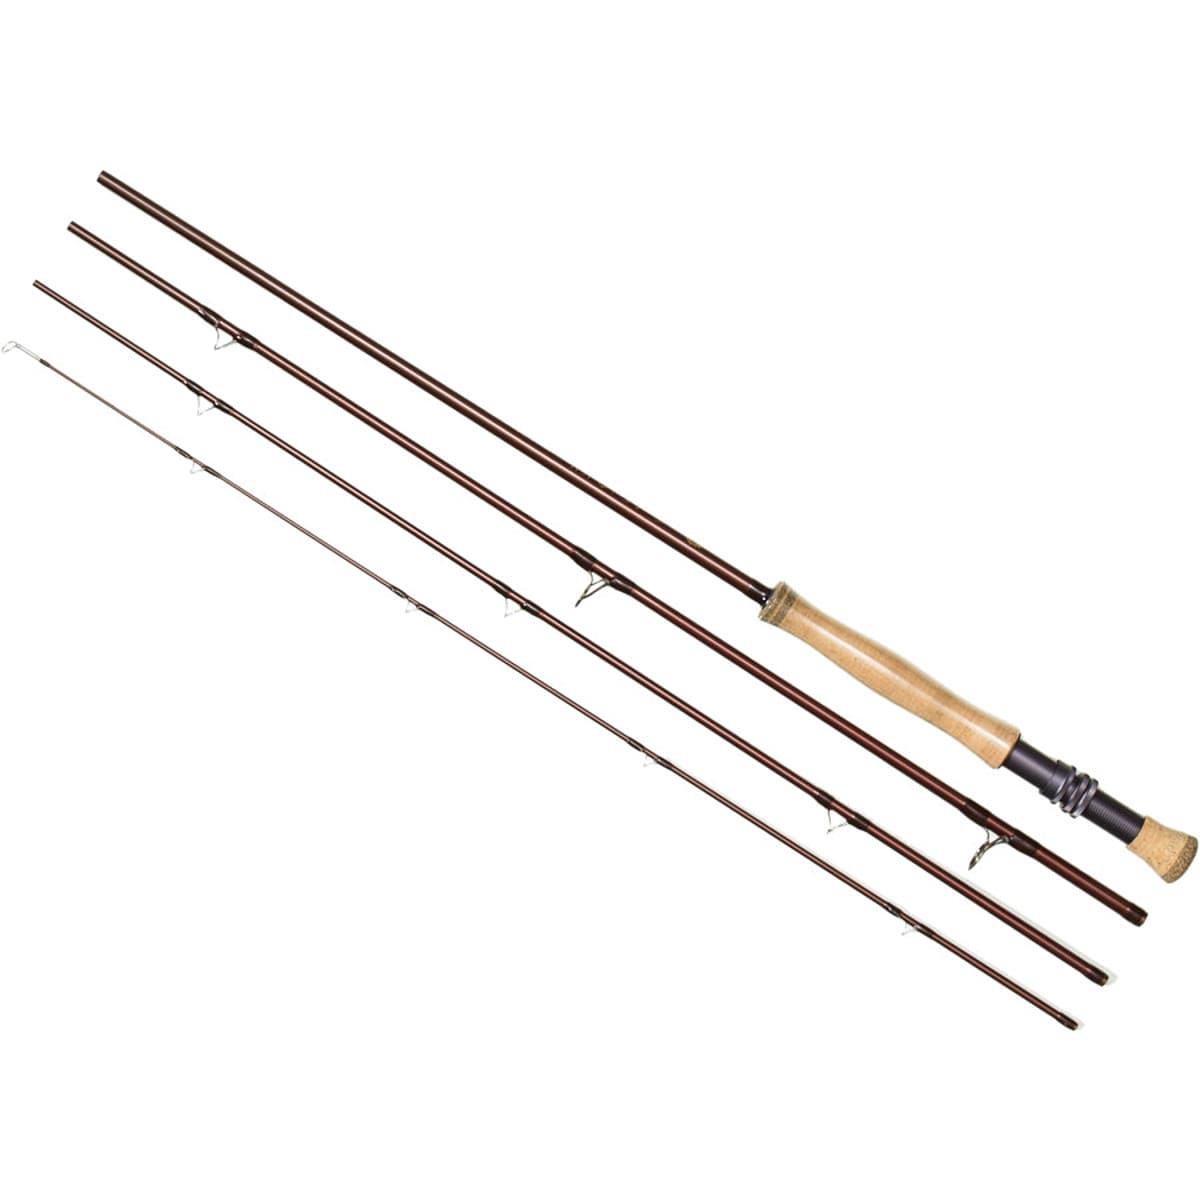 TFO Mangrove Series Fly Rod - 4-Piece - Fly Fishing